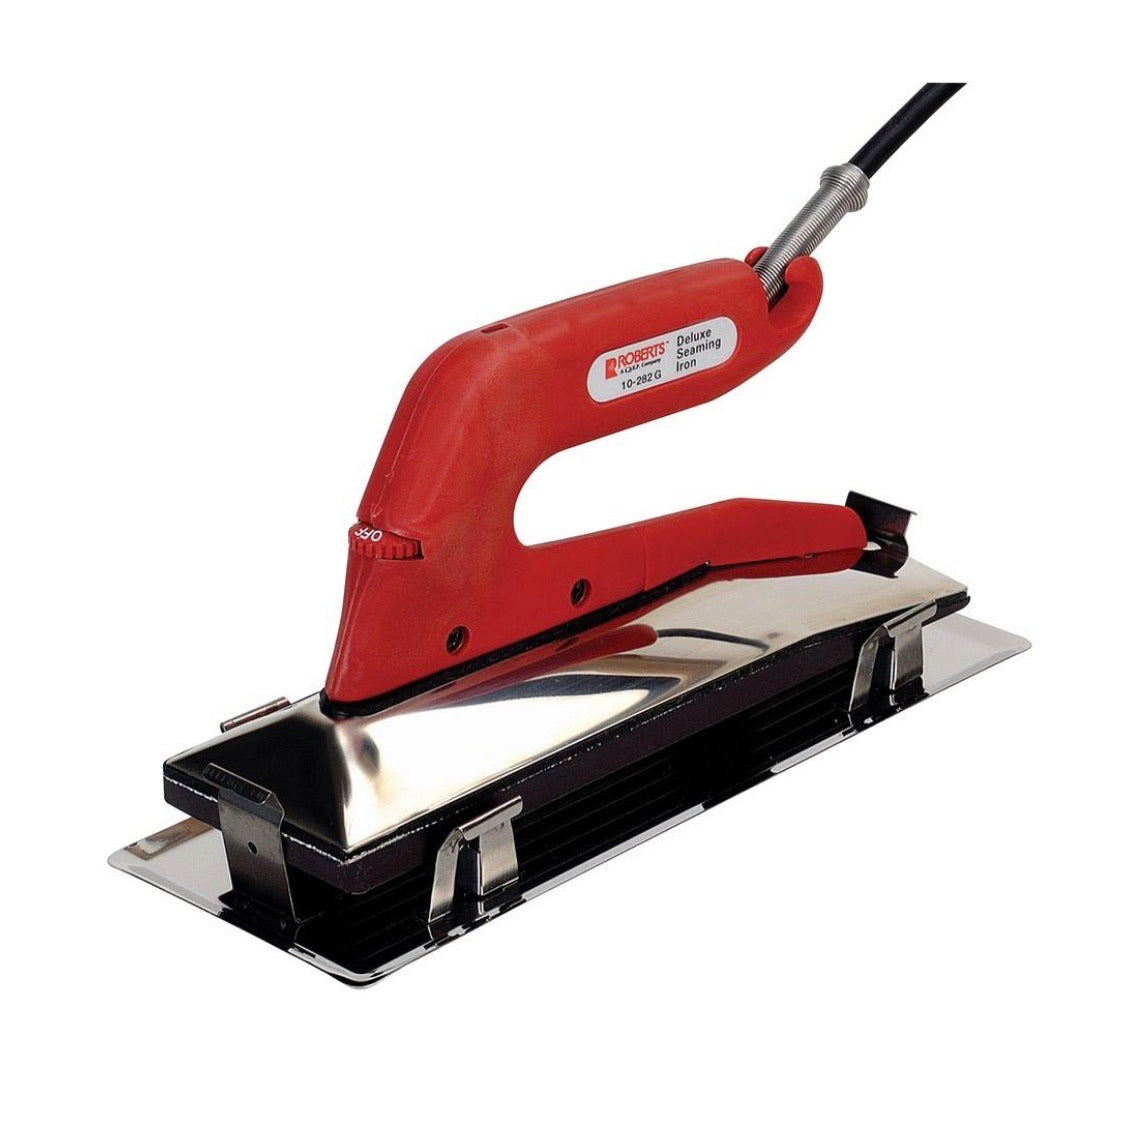 Roberts Deluxe Heat Bond Carpet Iron with Non-Stick, Grooved Base